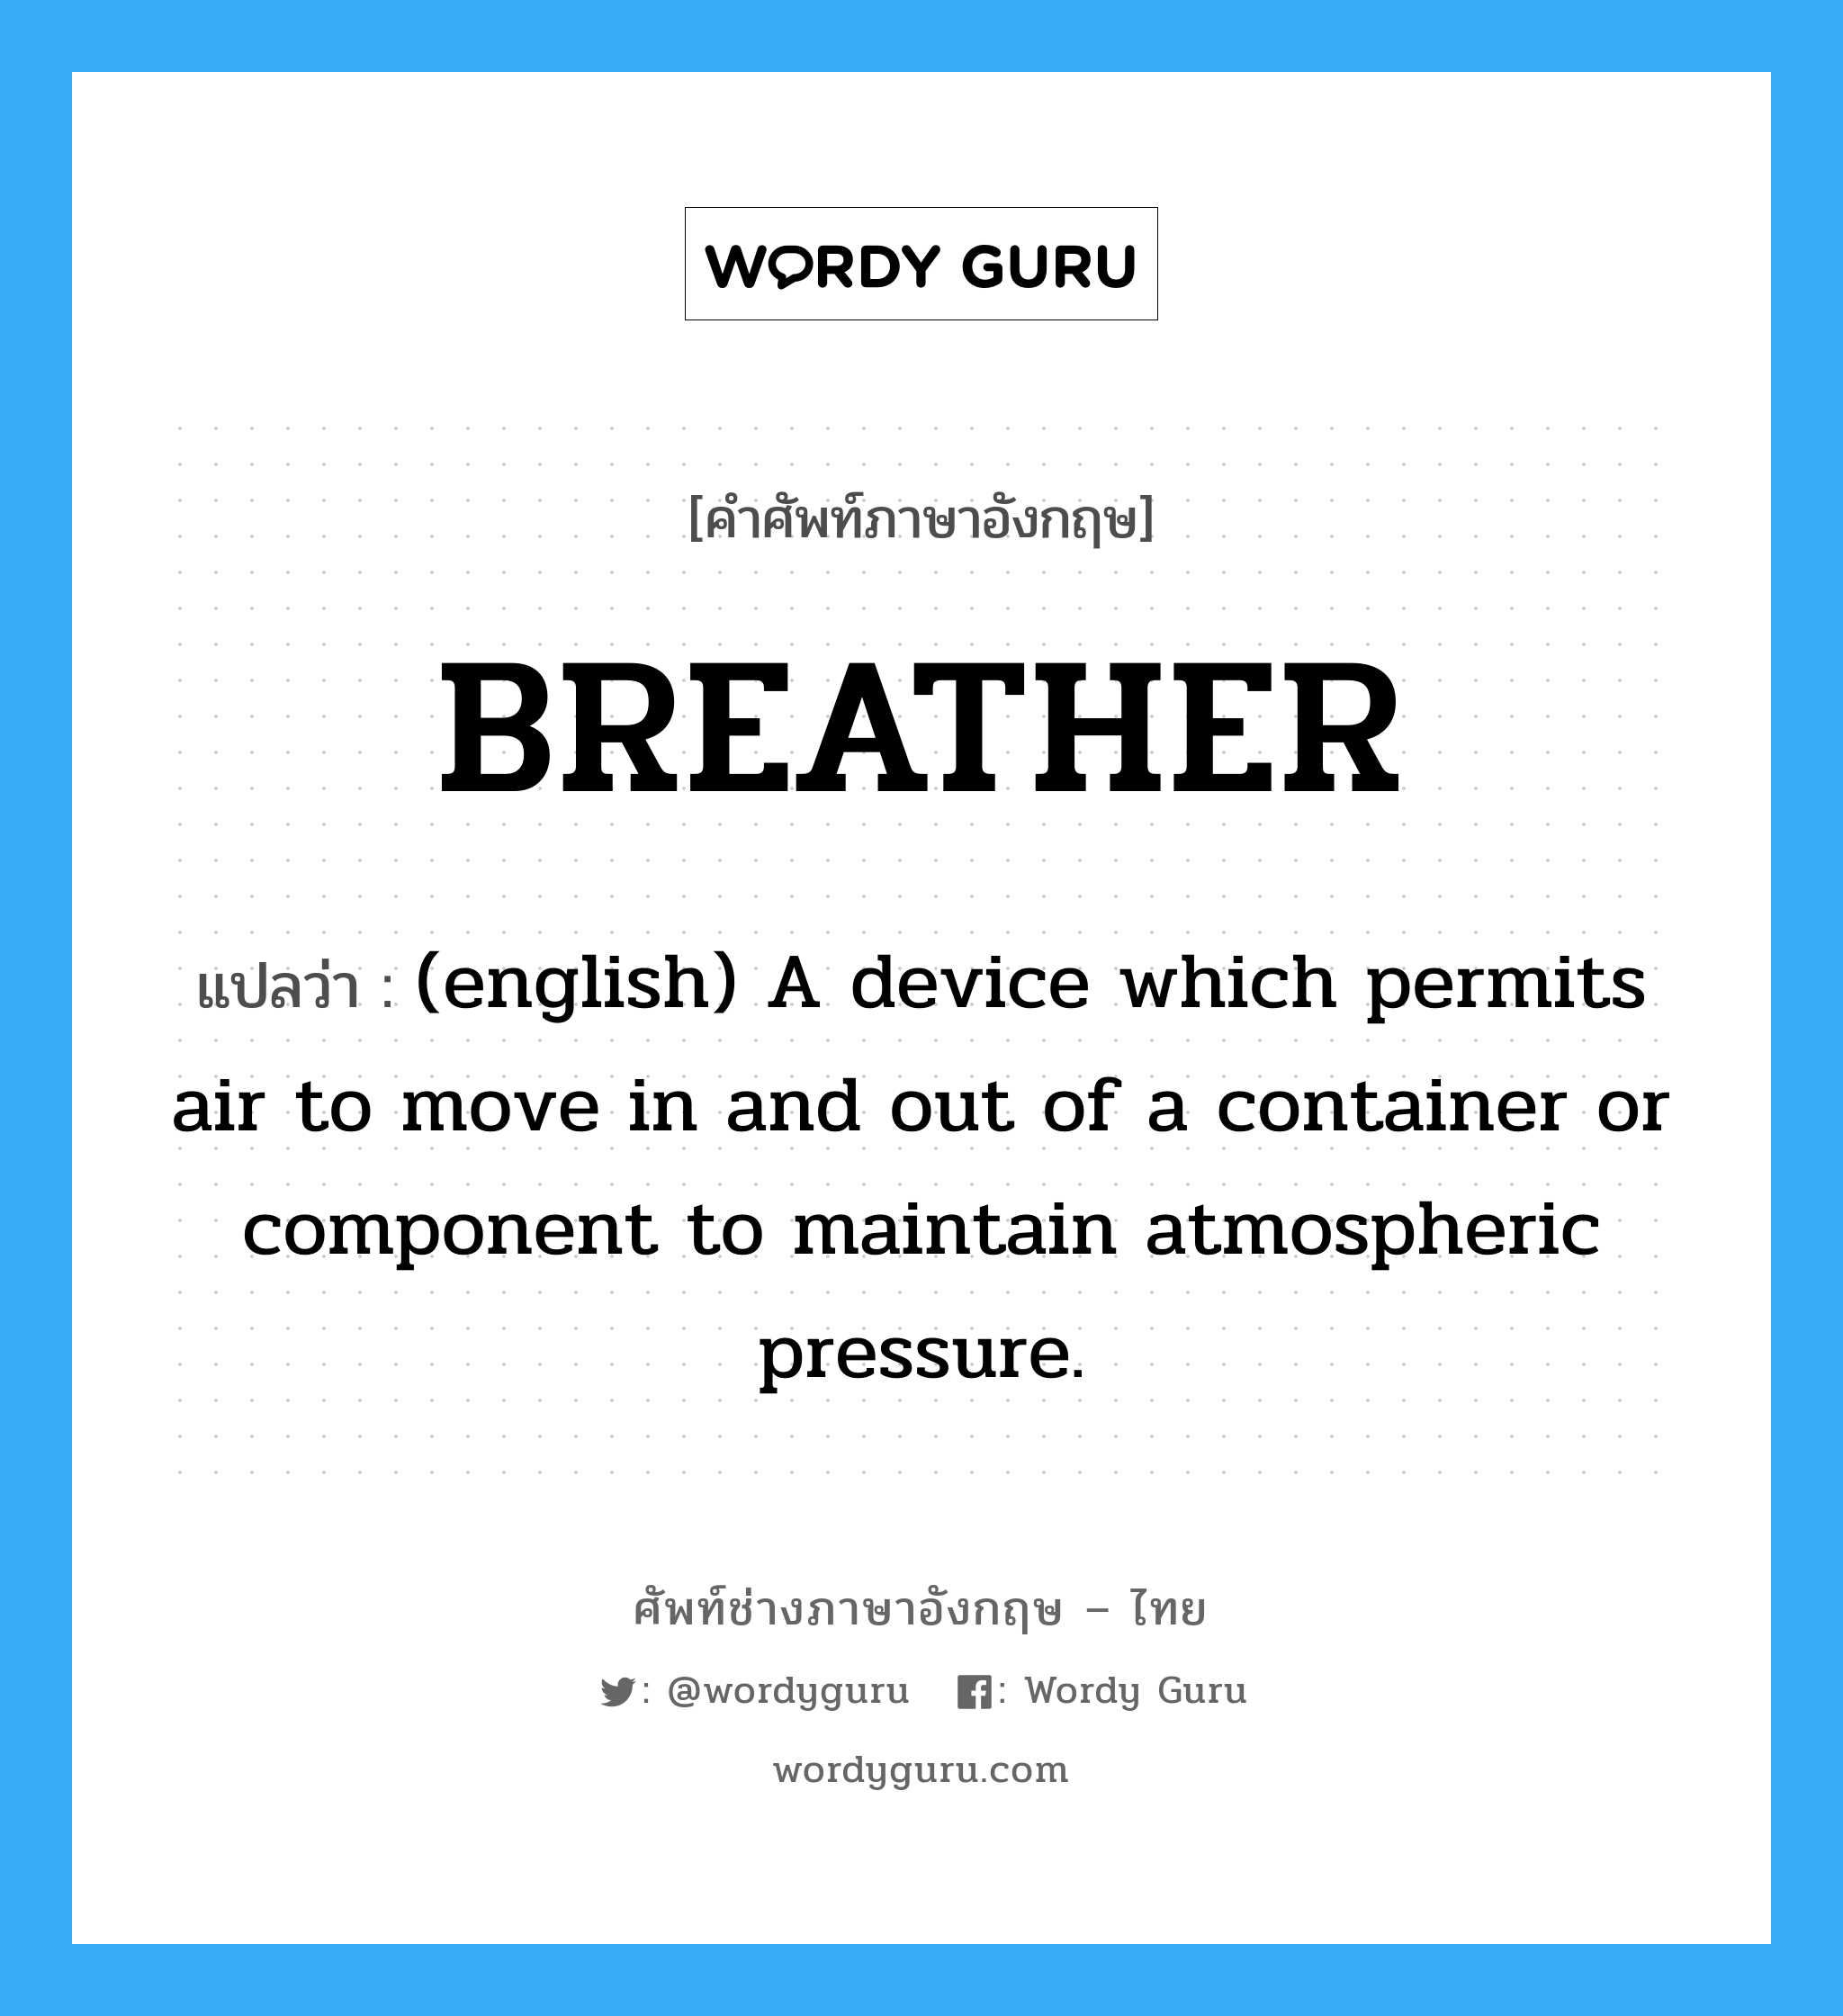 BREATHER แปลว่า?, คำศัพท์ช่างภาษาอังกฤษ - ไทย BREATHER คำศัพท์ภาษาอังกฤษ BREATHER แปลว่า (english) A device which permits air to move in and out of a container or component to maintain atmospheric pressure.